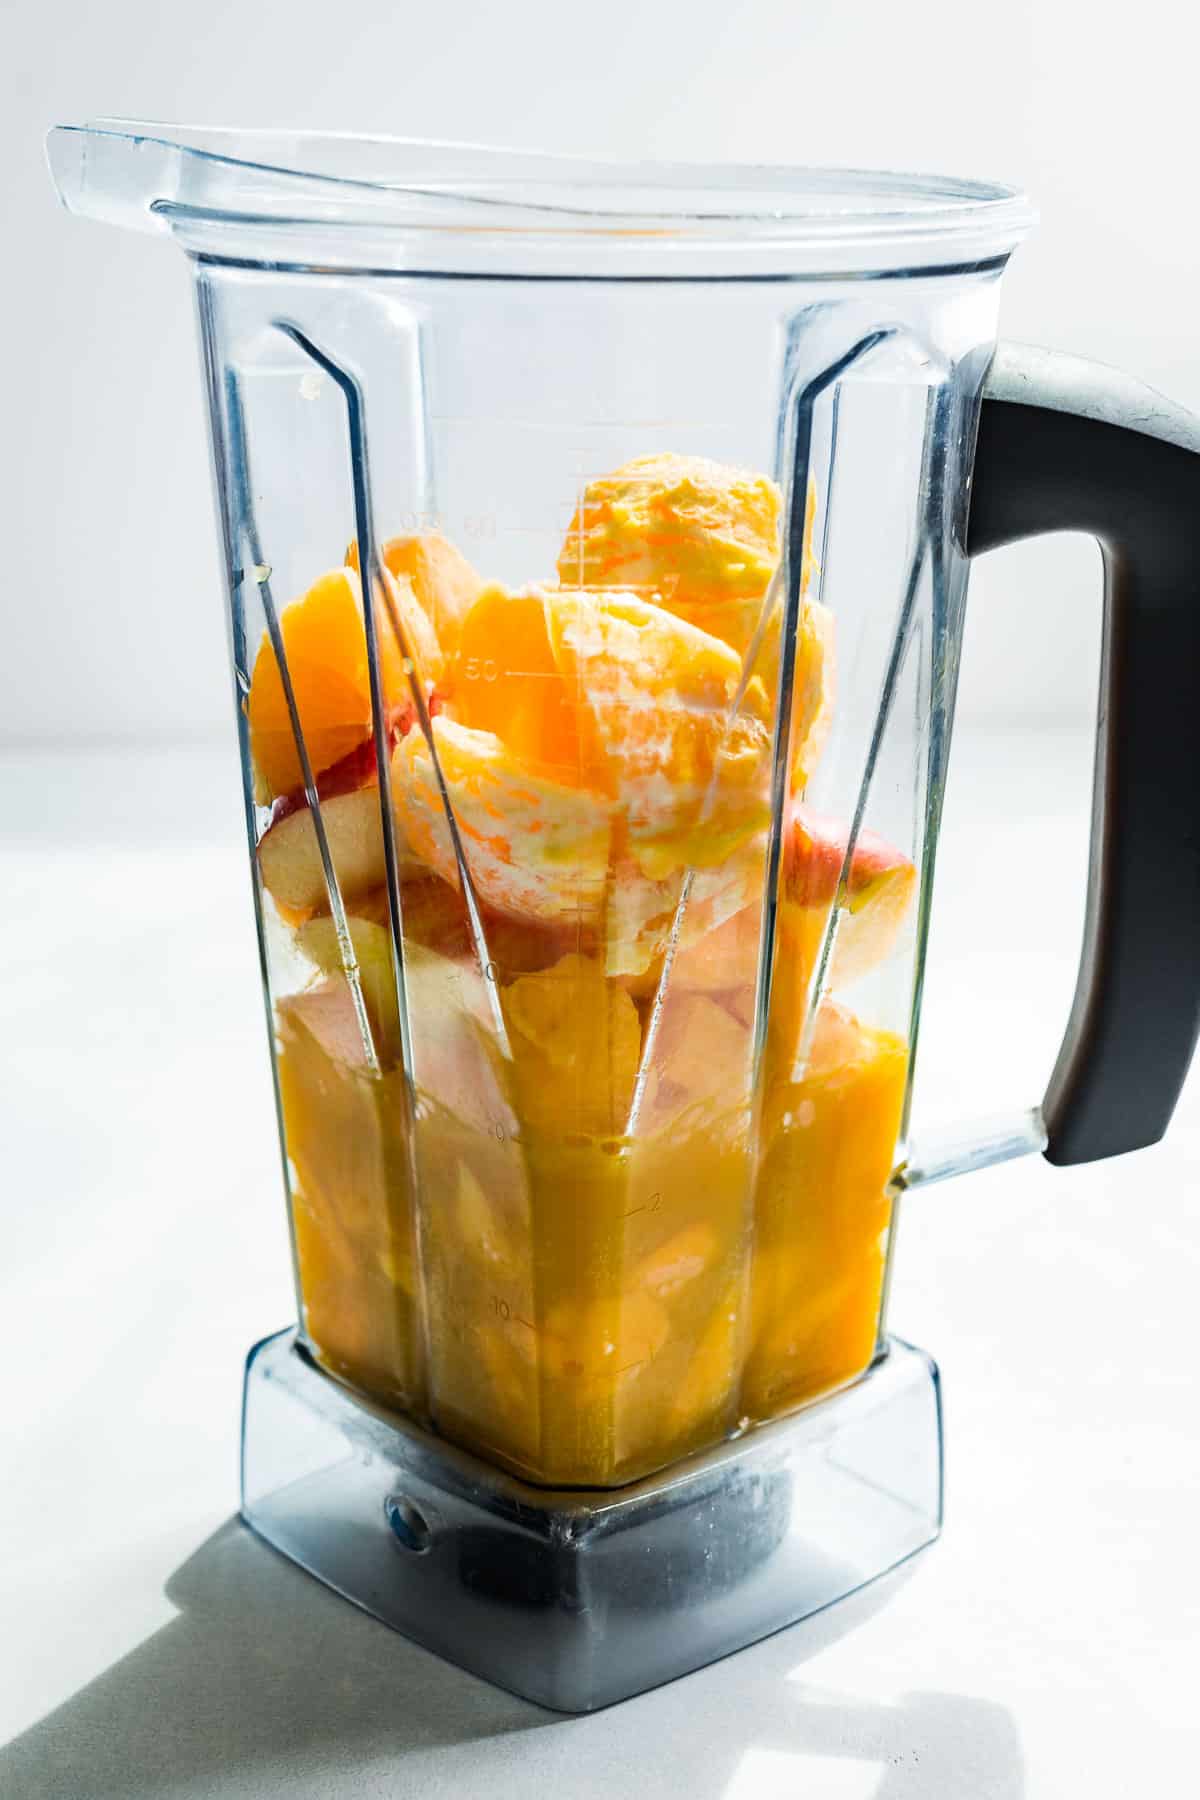 The mango, orange, apple, and orange juice added to a blender container.